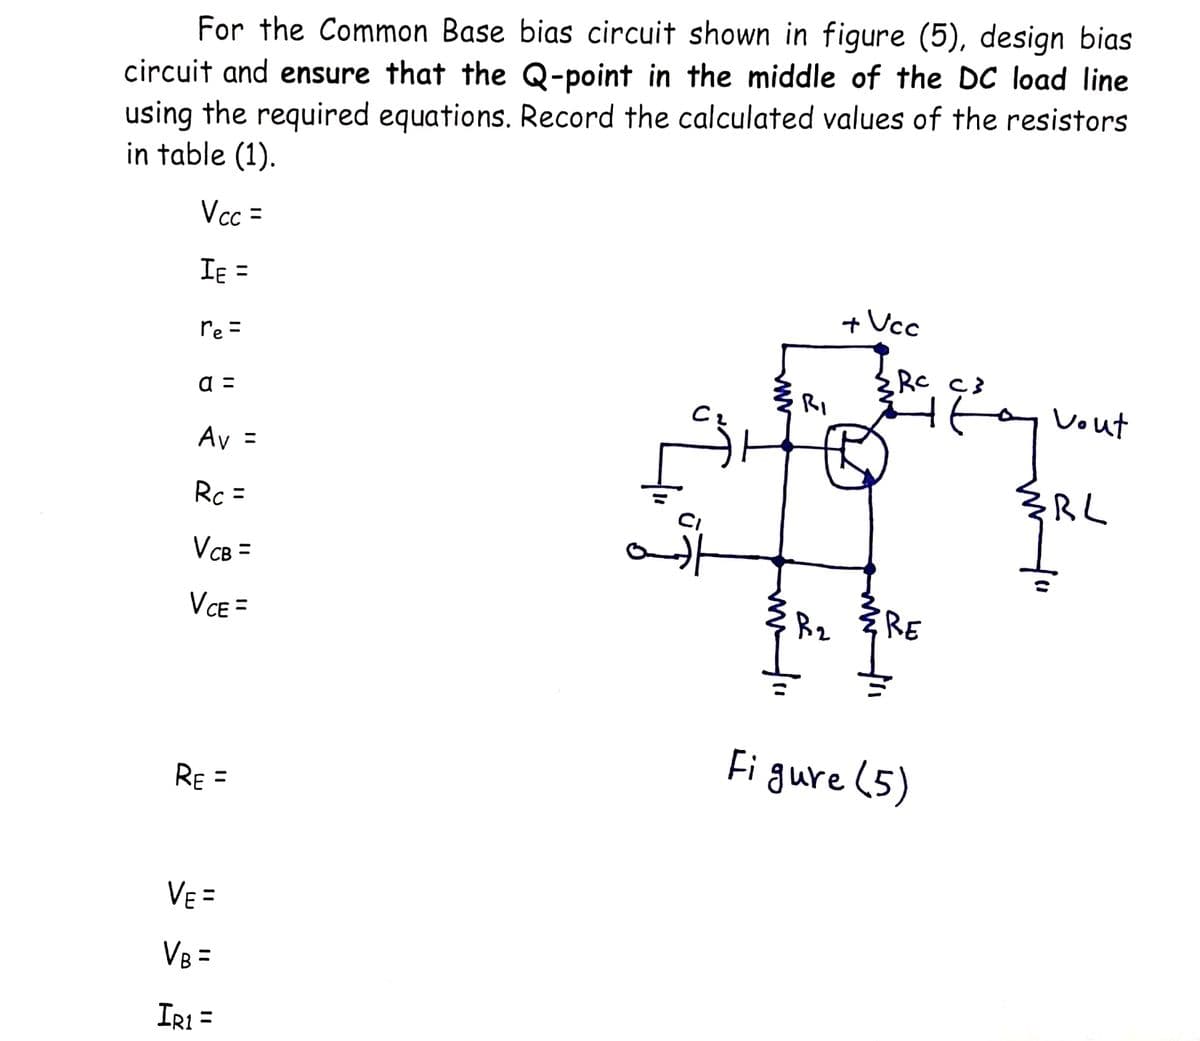 For the Common Base bias circuit shown in figure (5), design bias
circuit and ensure that the Q-point in the middle of the DC load line
using the required equations. Record the calculated values of the resistors
in table (1).
Vcc =
IE =
+ Ucc
re =
Rc Ç3
а -
RI
Vout
Av =
Rc =
RL
%3D
VcB =
VE =
RE
Fi gure (5)
RE =
VE =
%3D
VB =
IR1 =
